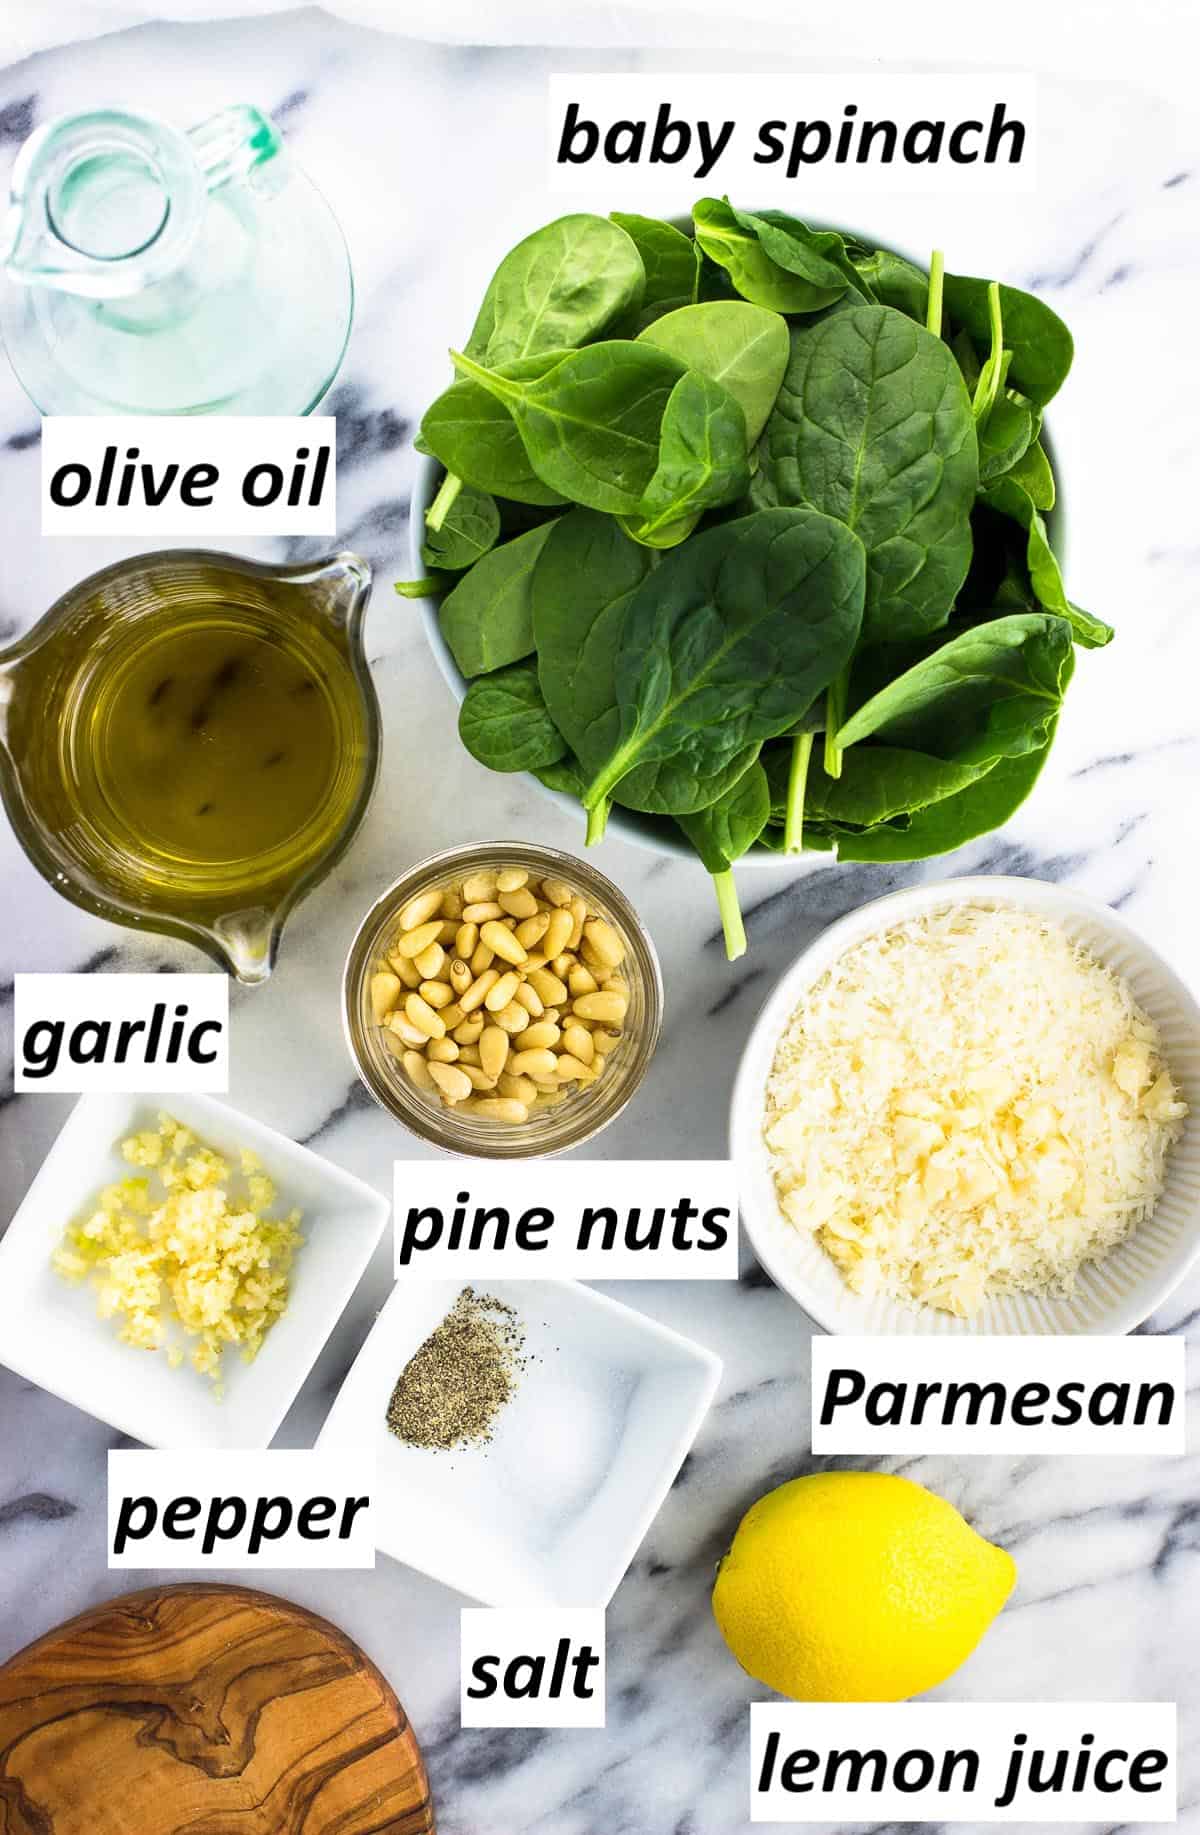 Recipe ingredients on a marble board labeled with text.